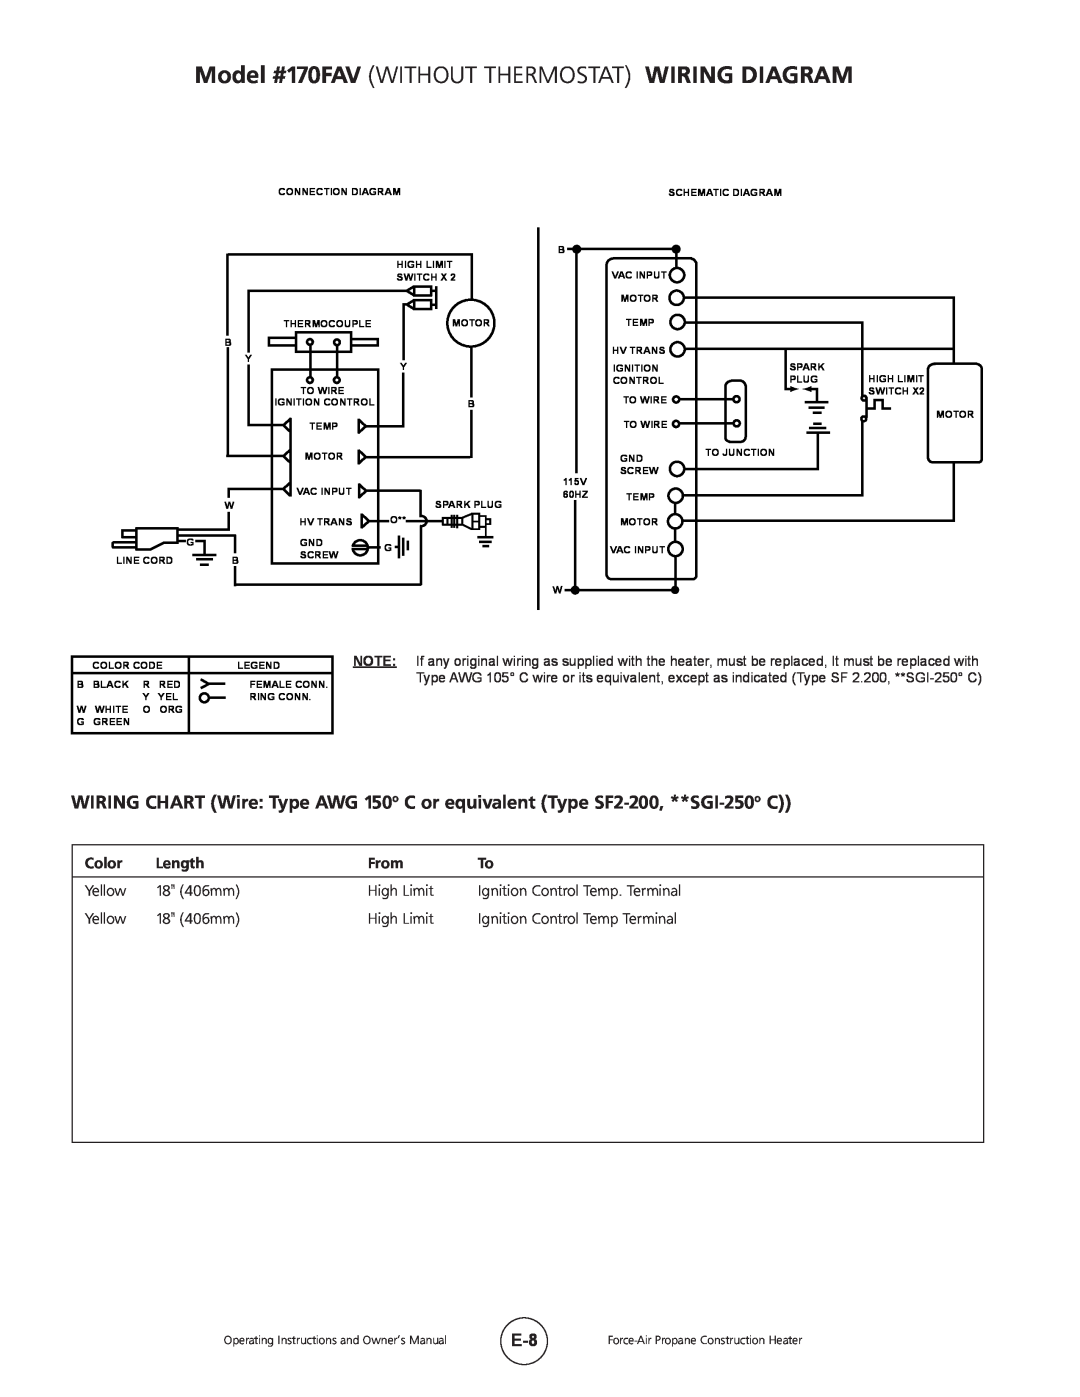 Mr. Heater 170FAVT operating instructions Model #170FAV WITHOUT THERMOSTAT WIRING DIAGRAM 